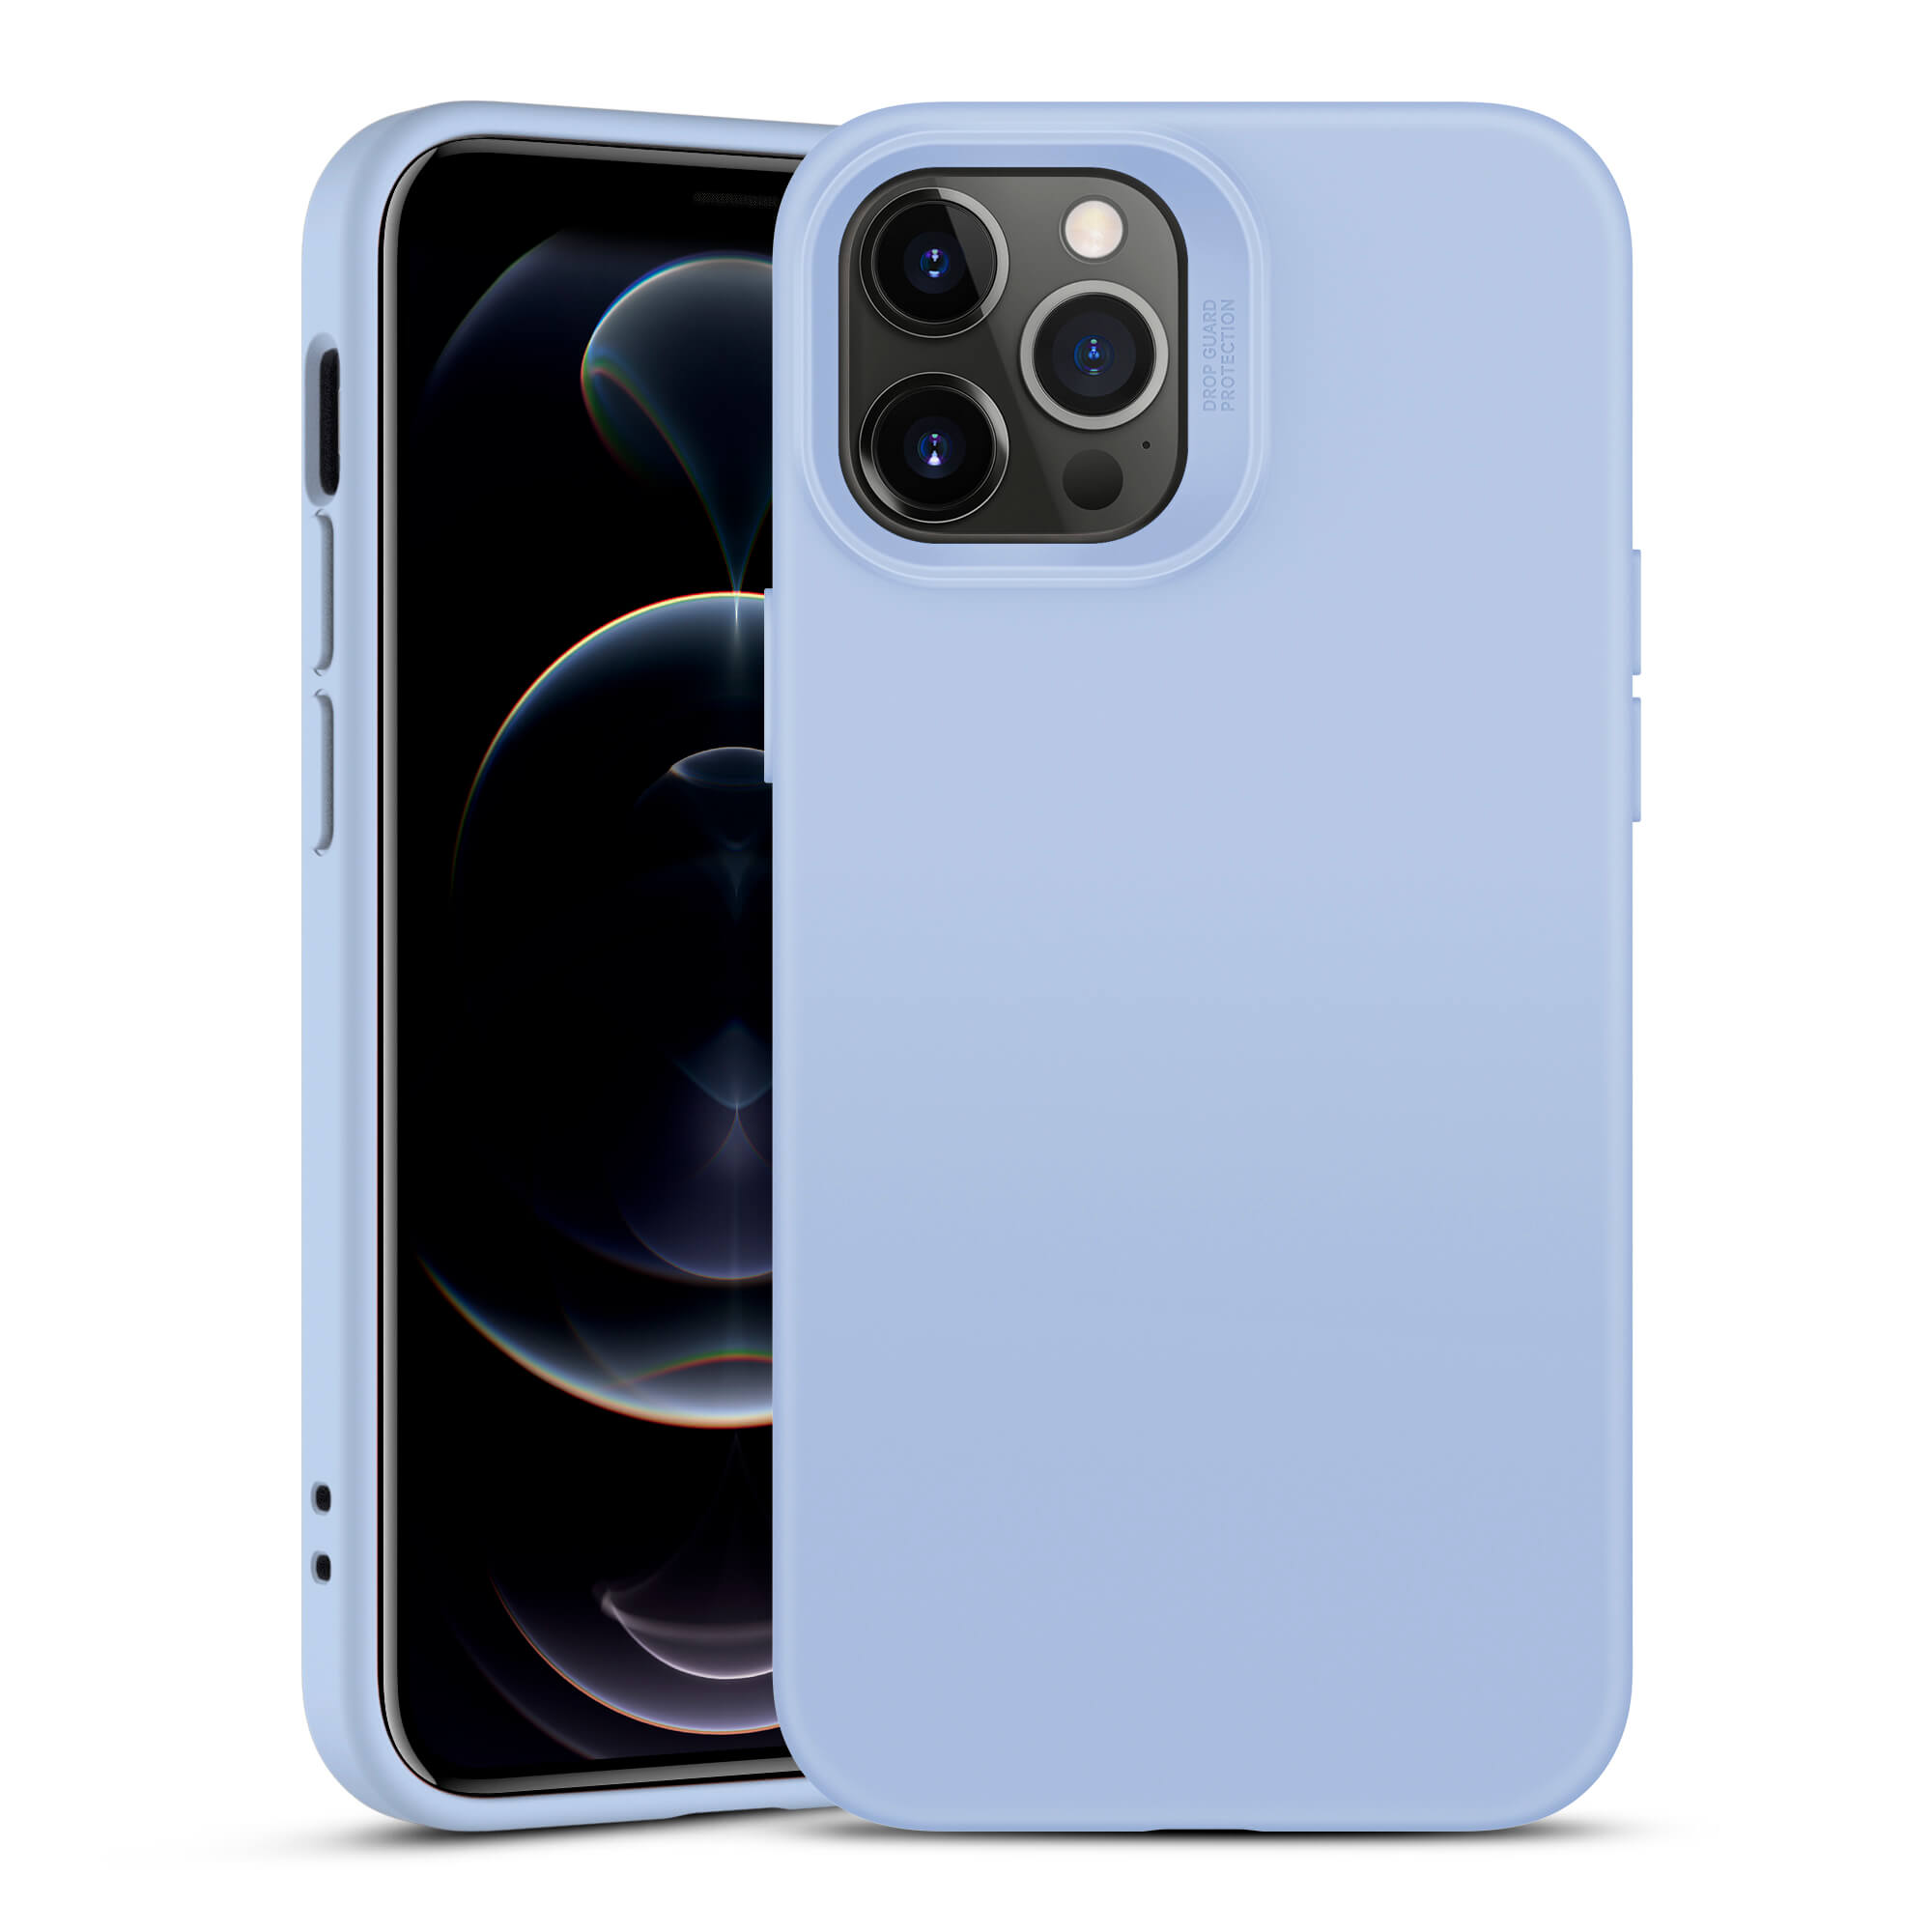  Apple iPhone 12 and iPhone 12 Pro Silicone Case with